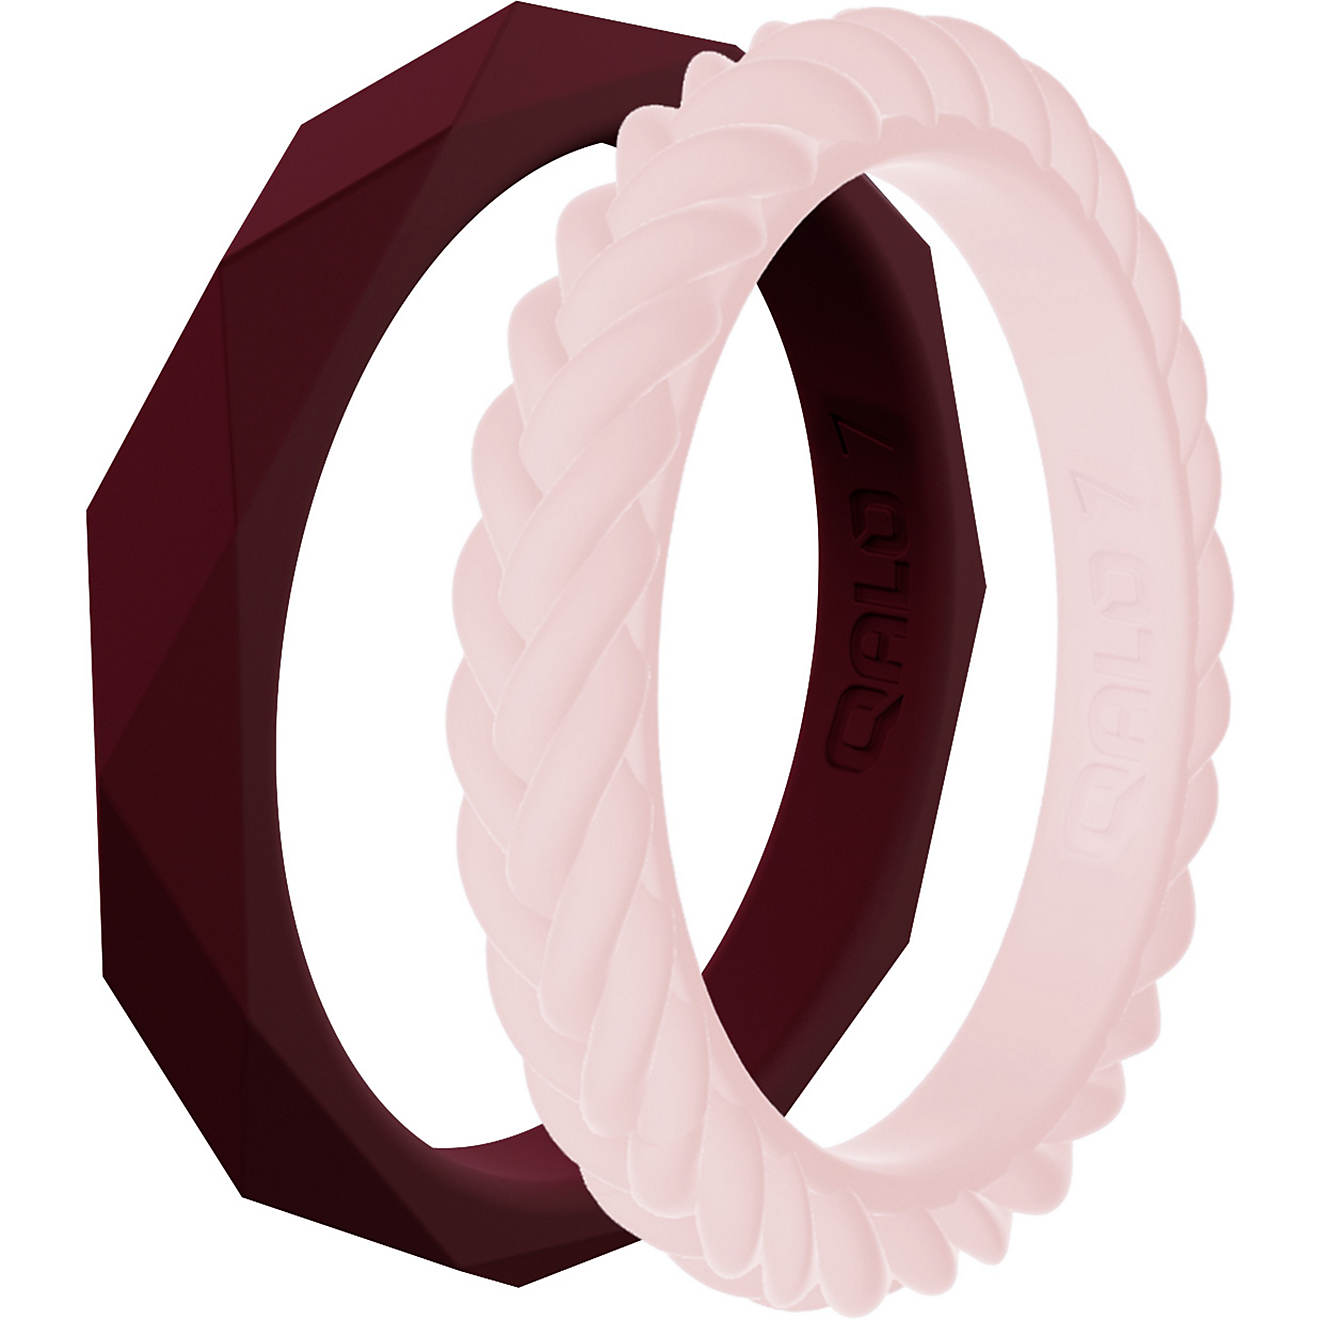 QALO Women's Stackable Silicone Wedding Ring Set Academy